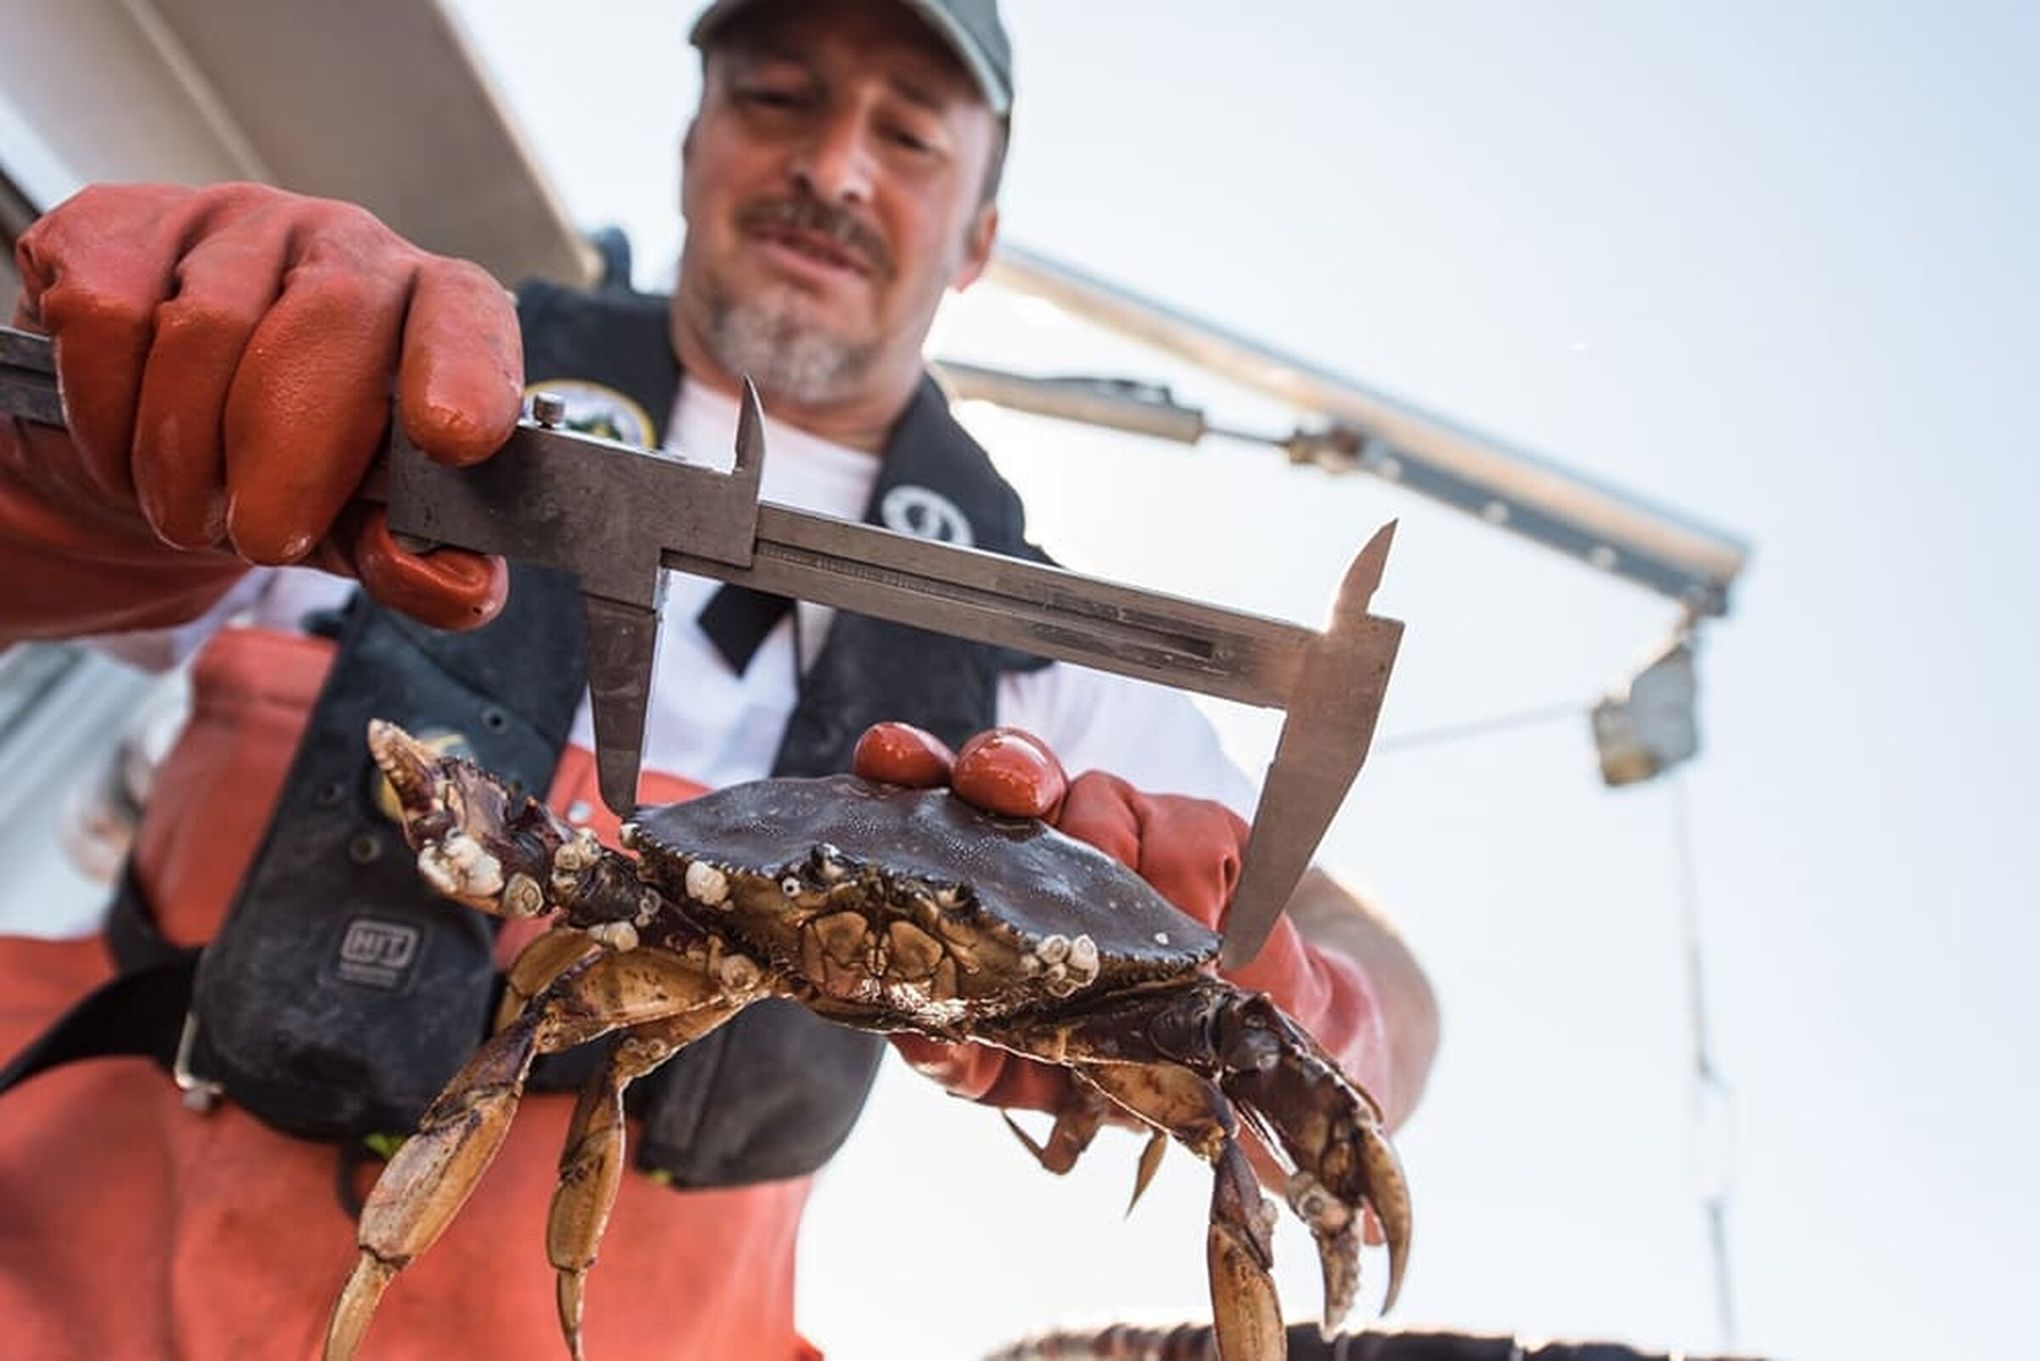 Dungeness crab dying amid low oxygen levels linked to climate